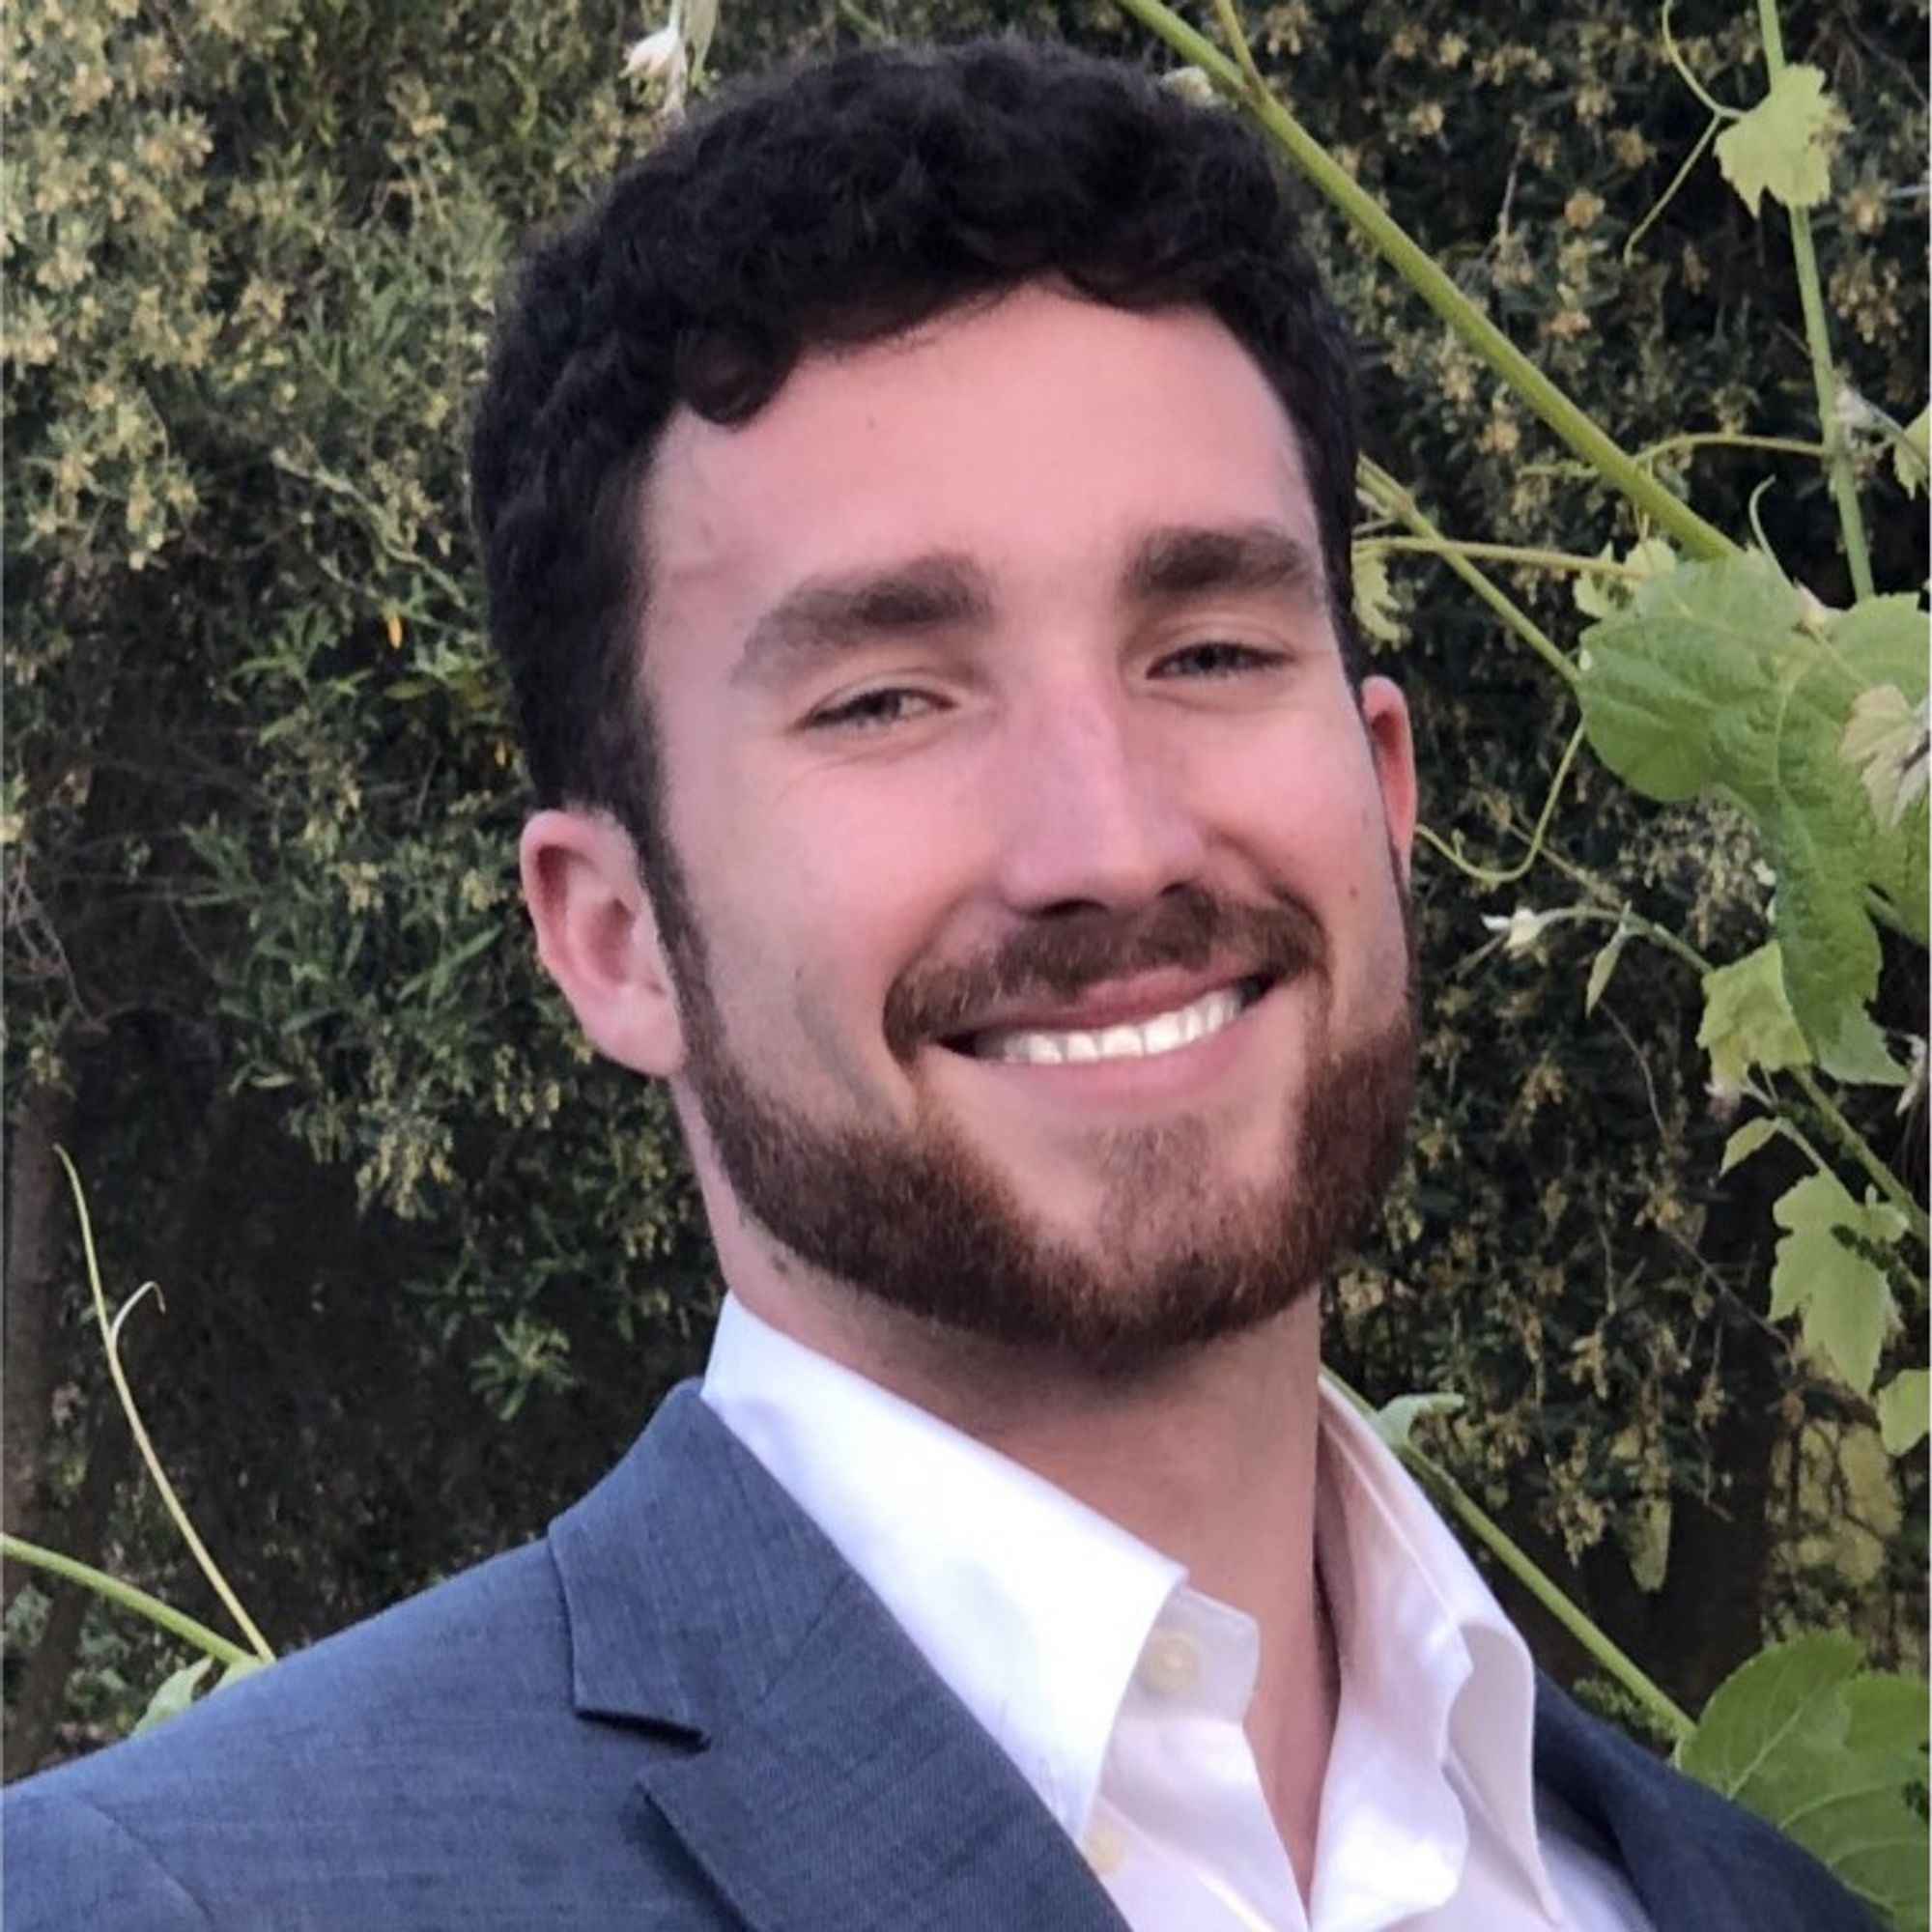 Preston Vaughn
Business Development Representative
Prior technology consultant @Deloitte • Was varsity captain on high school baseball team and was lead role in two musicals at the same time